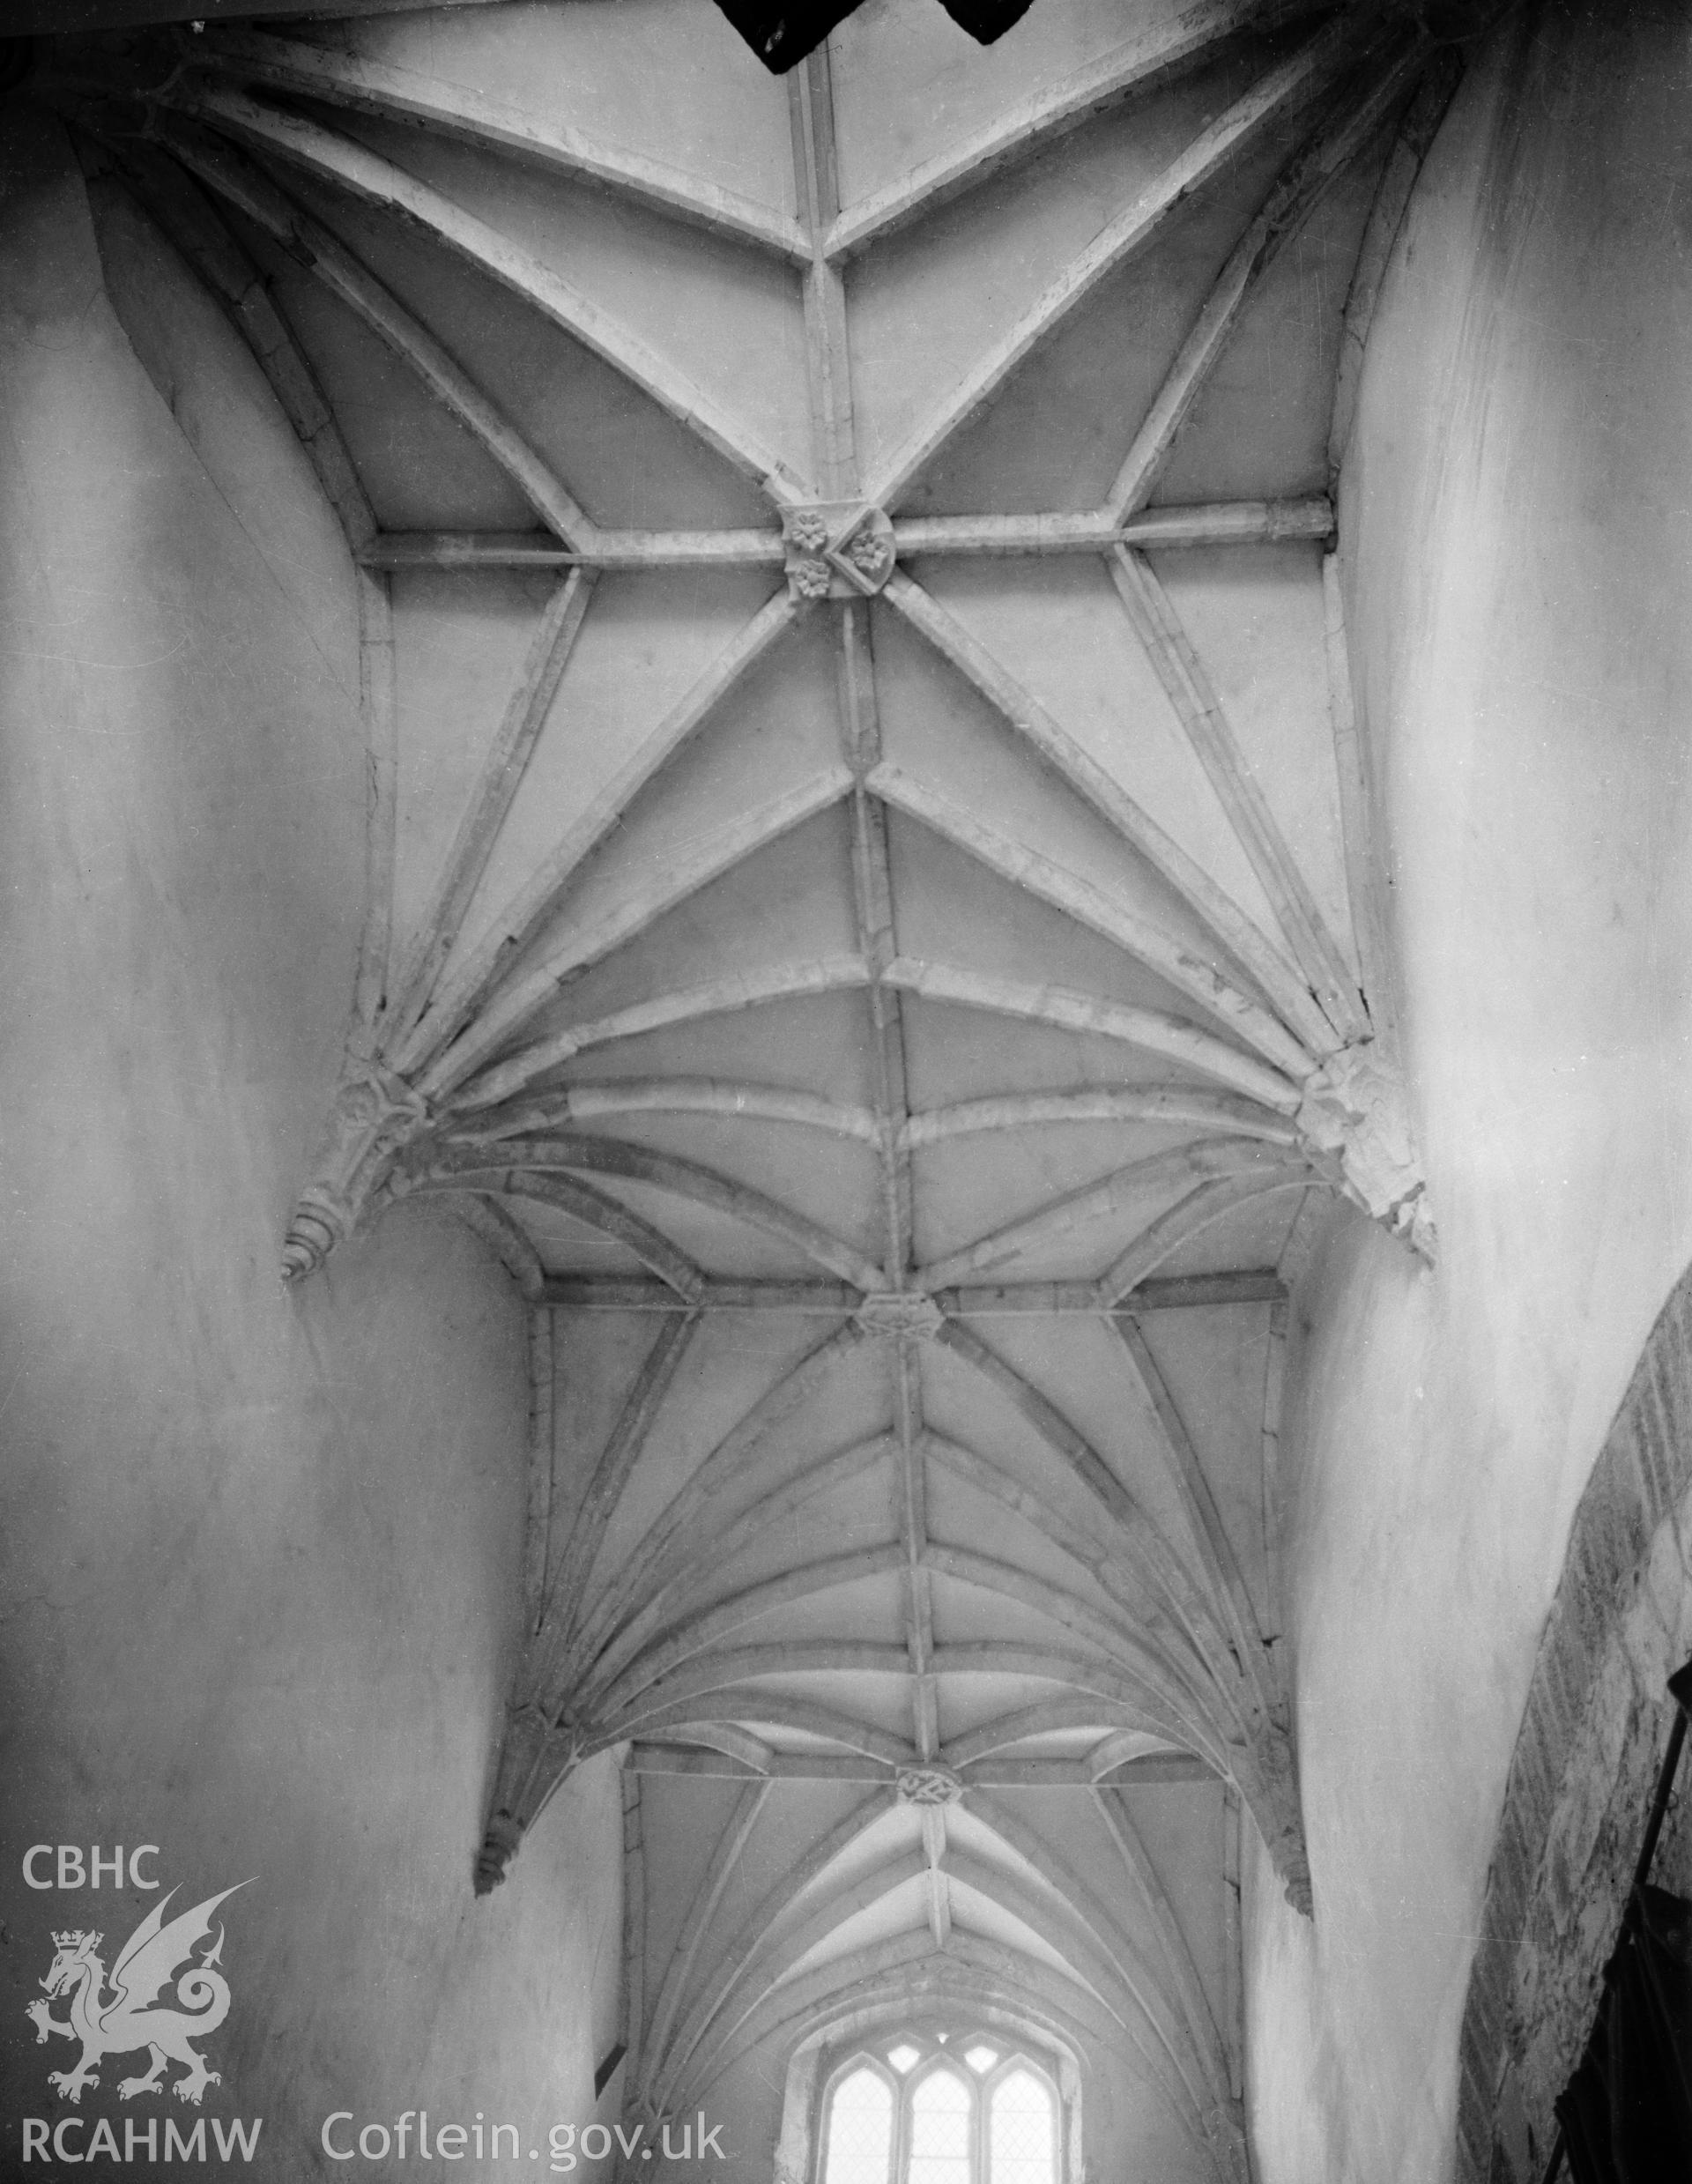 Interior view showing vaulted ceiling.